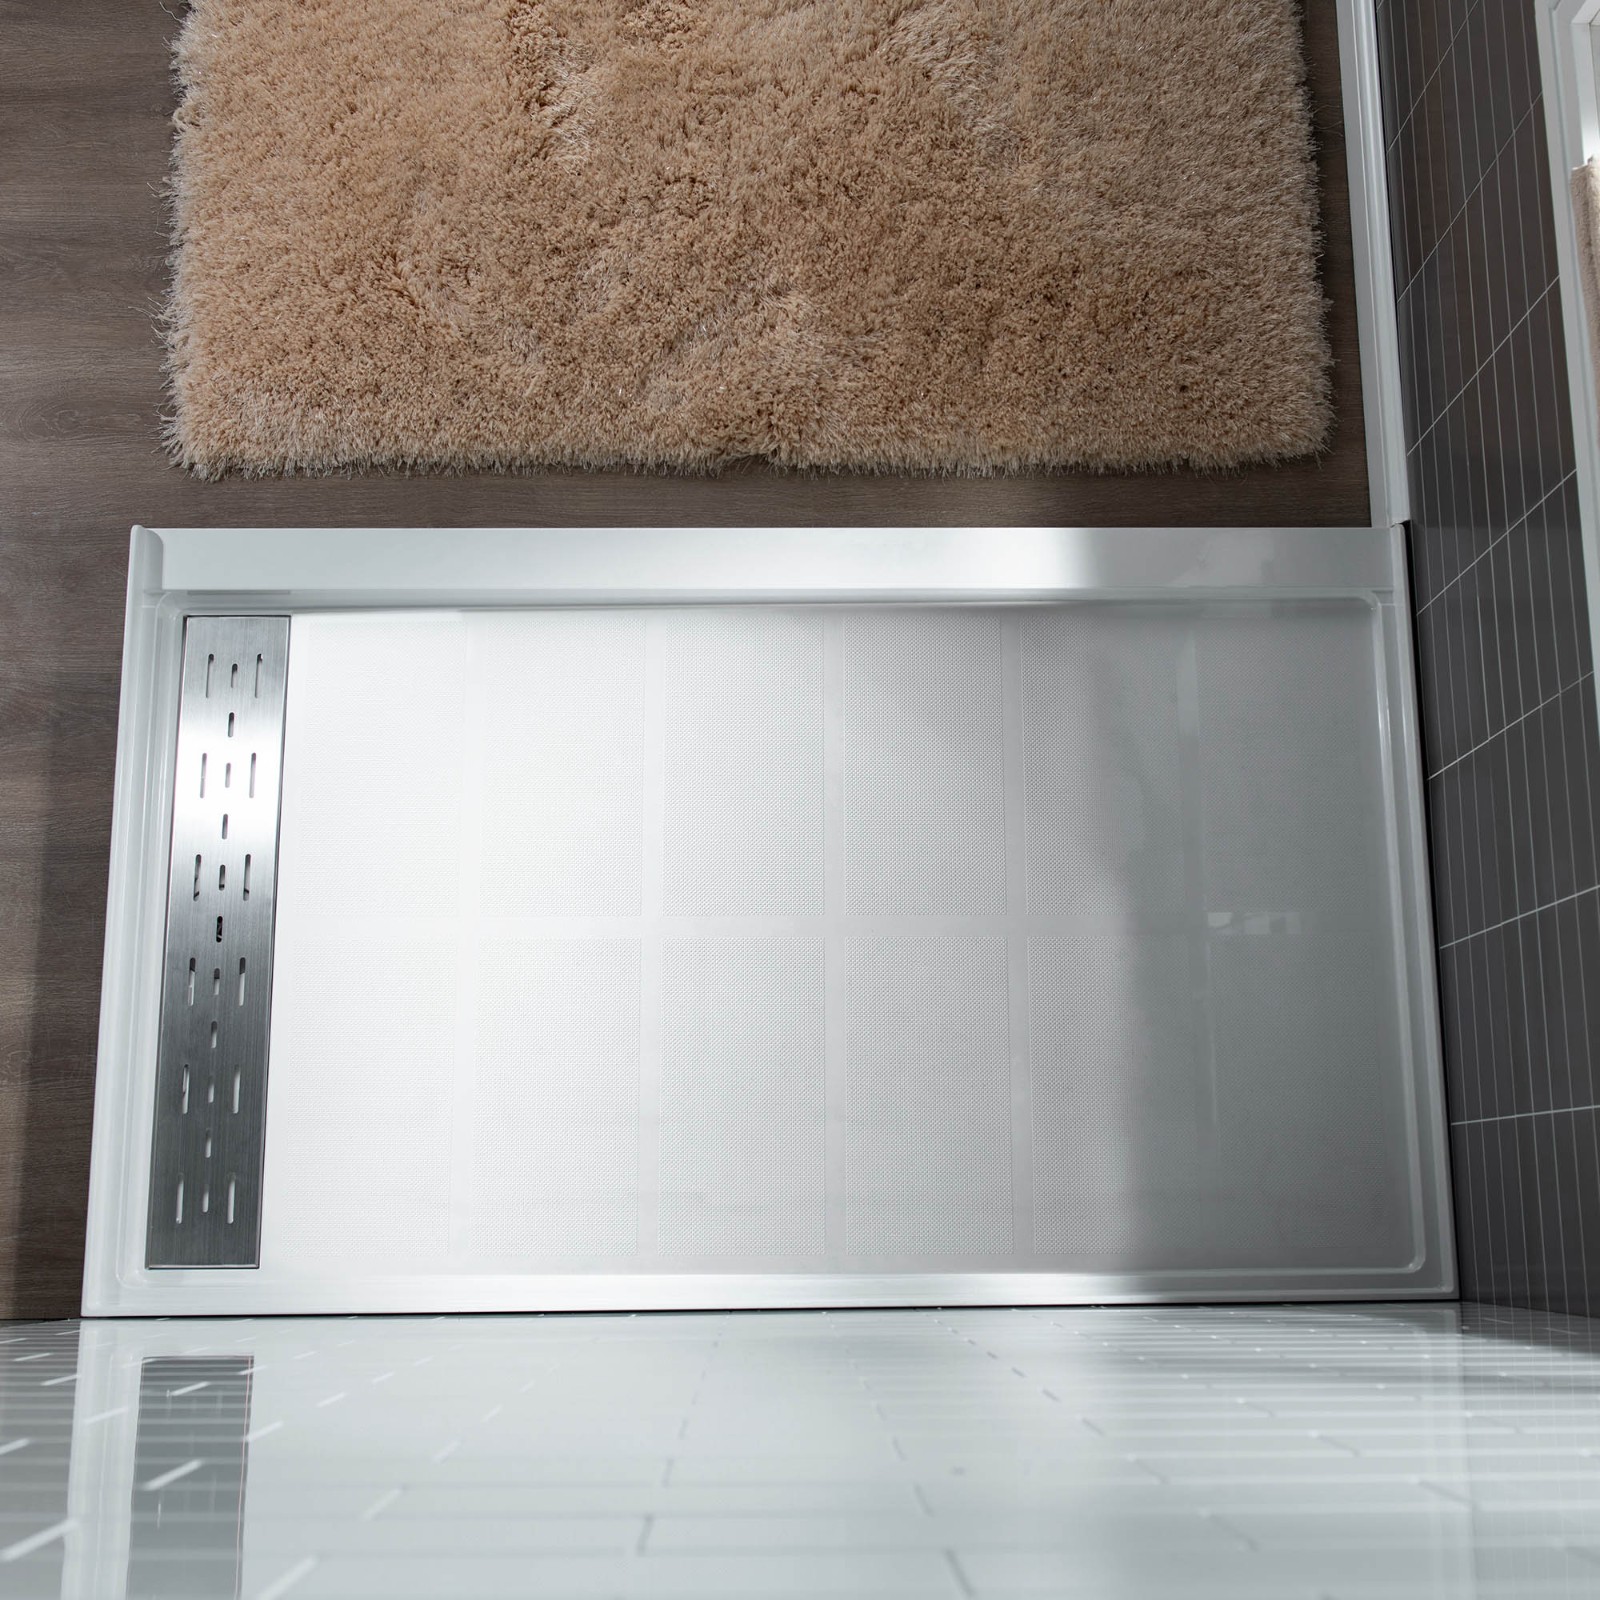  WOODBRIDGE SBR6036-1000L Solid Surface Shower Base with Recessed Trench Side Including Stainless Steel Linear Cover, 60